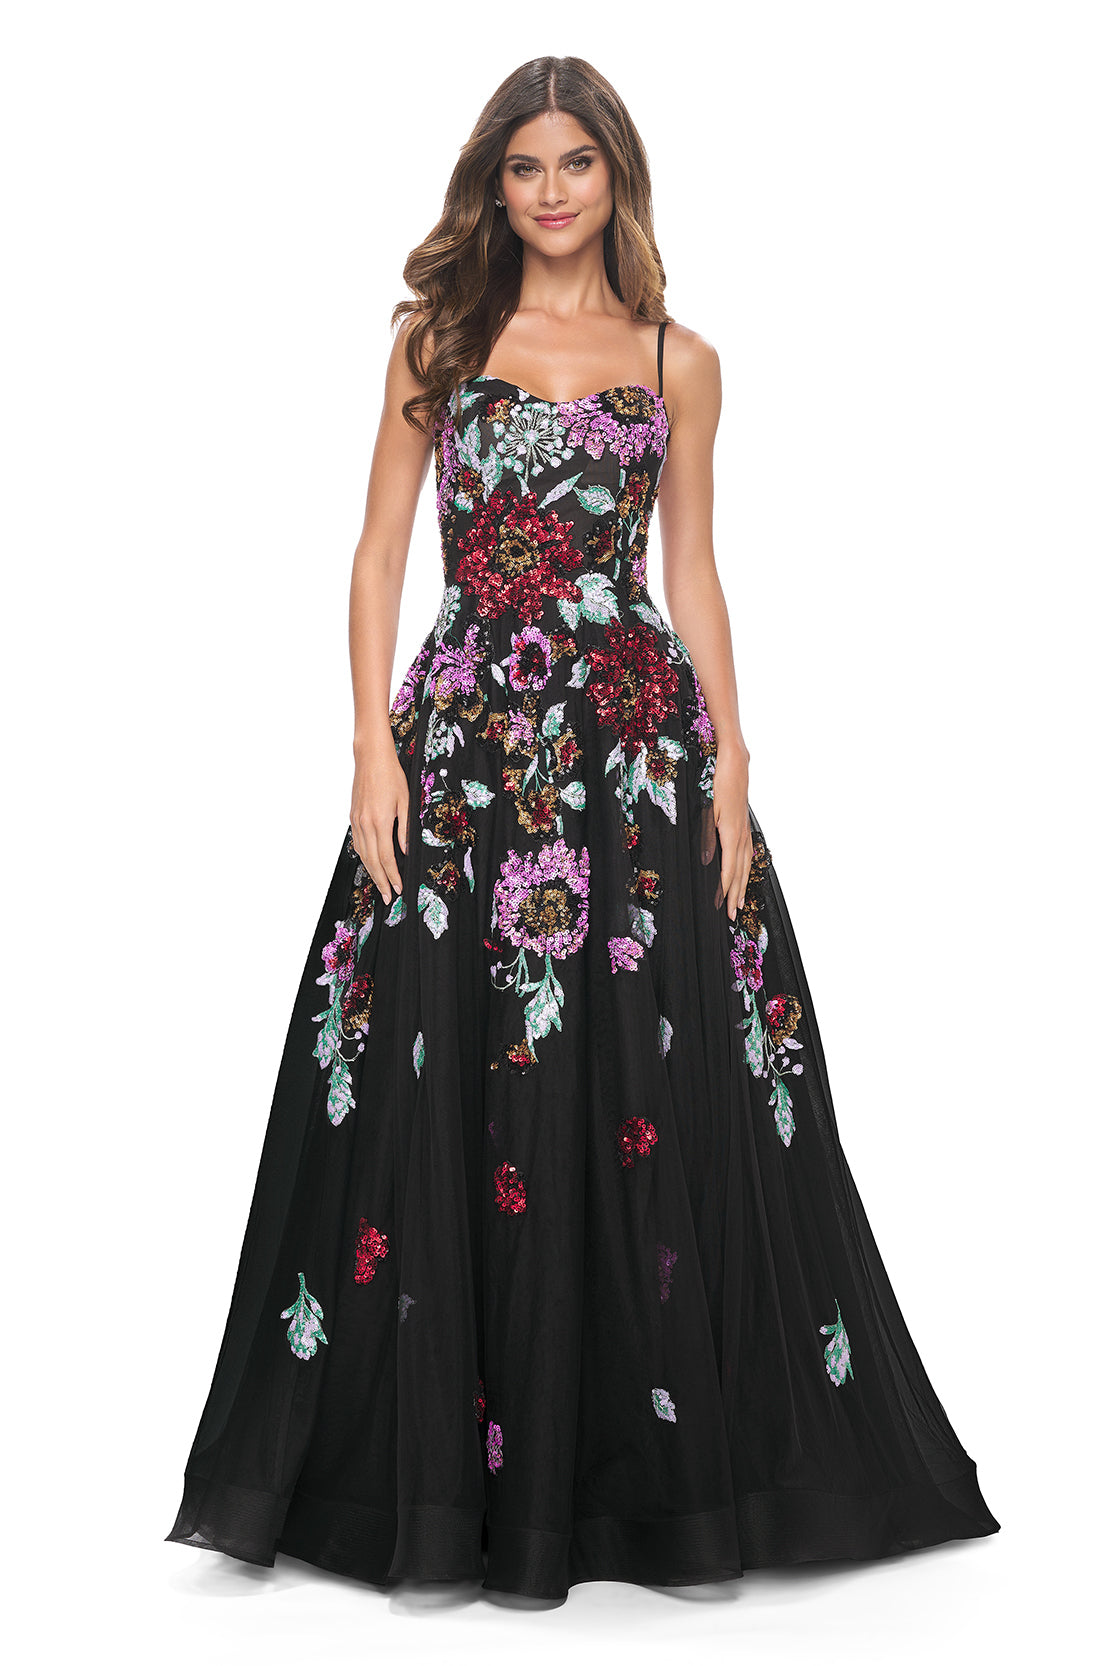 La Femme 32019 A-Line Gown with Multi-Color Floral Sequin Applique - A graceful A-line gown featuring delicate tulle, horsehair hem, and enchanting multi-color floral sequin applique. Perfect for proms and formal evening events.